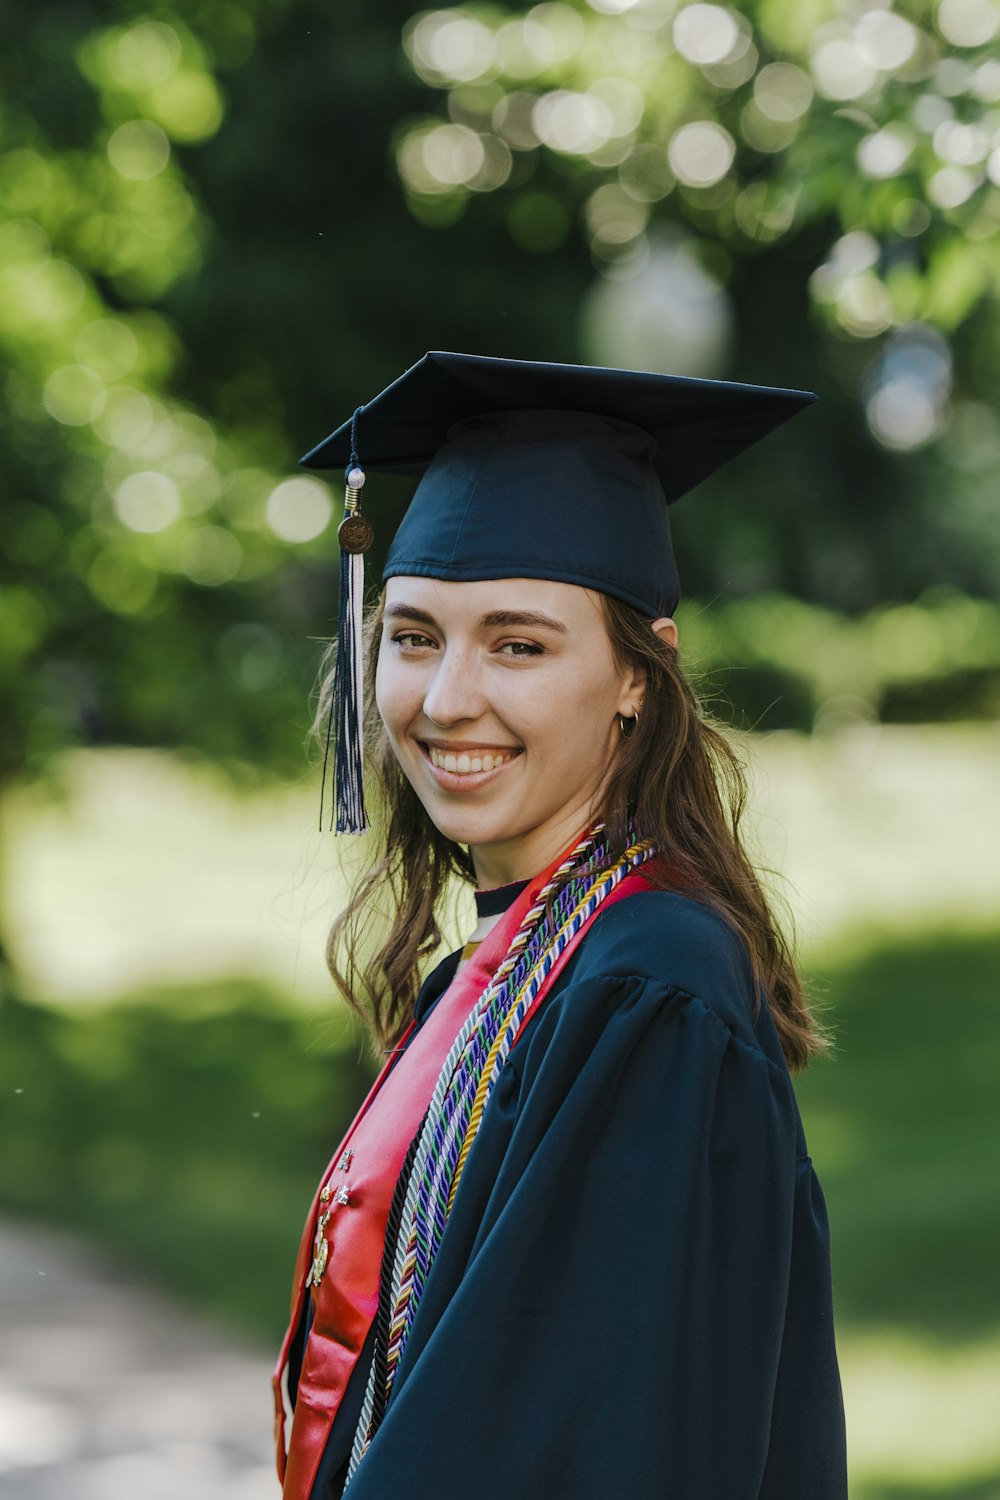 smiling woman in academic dress